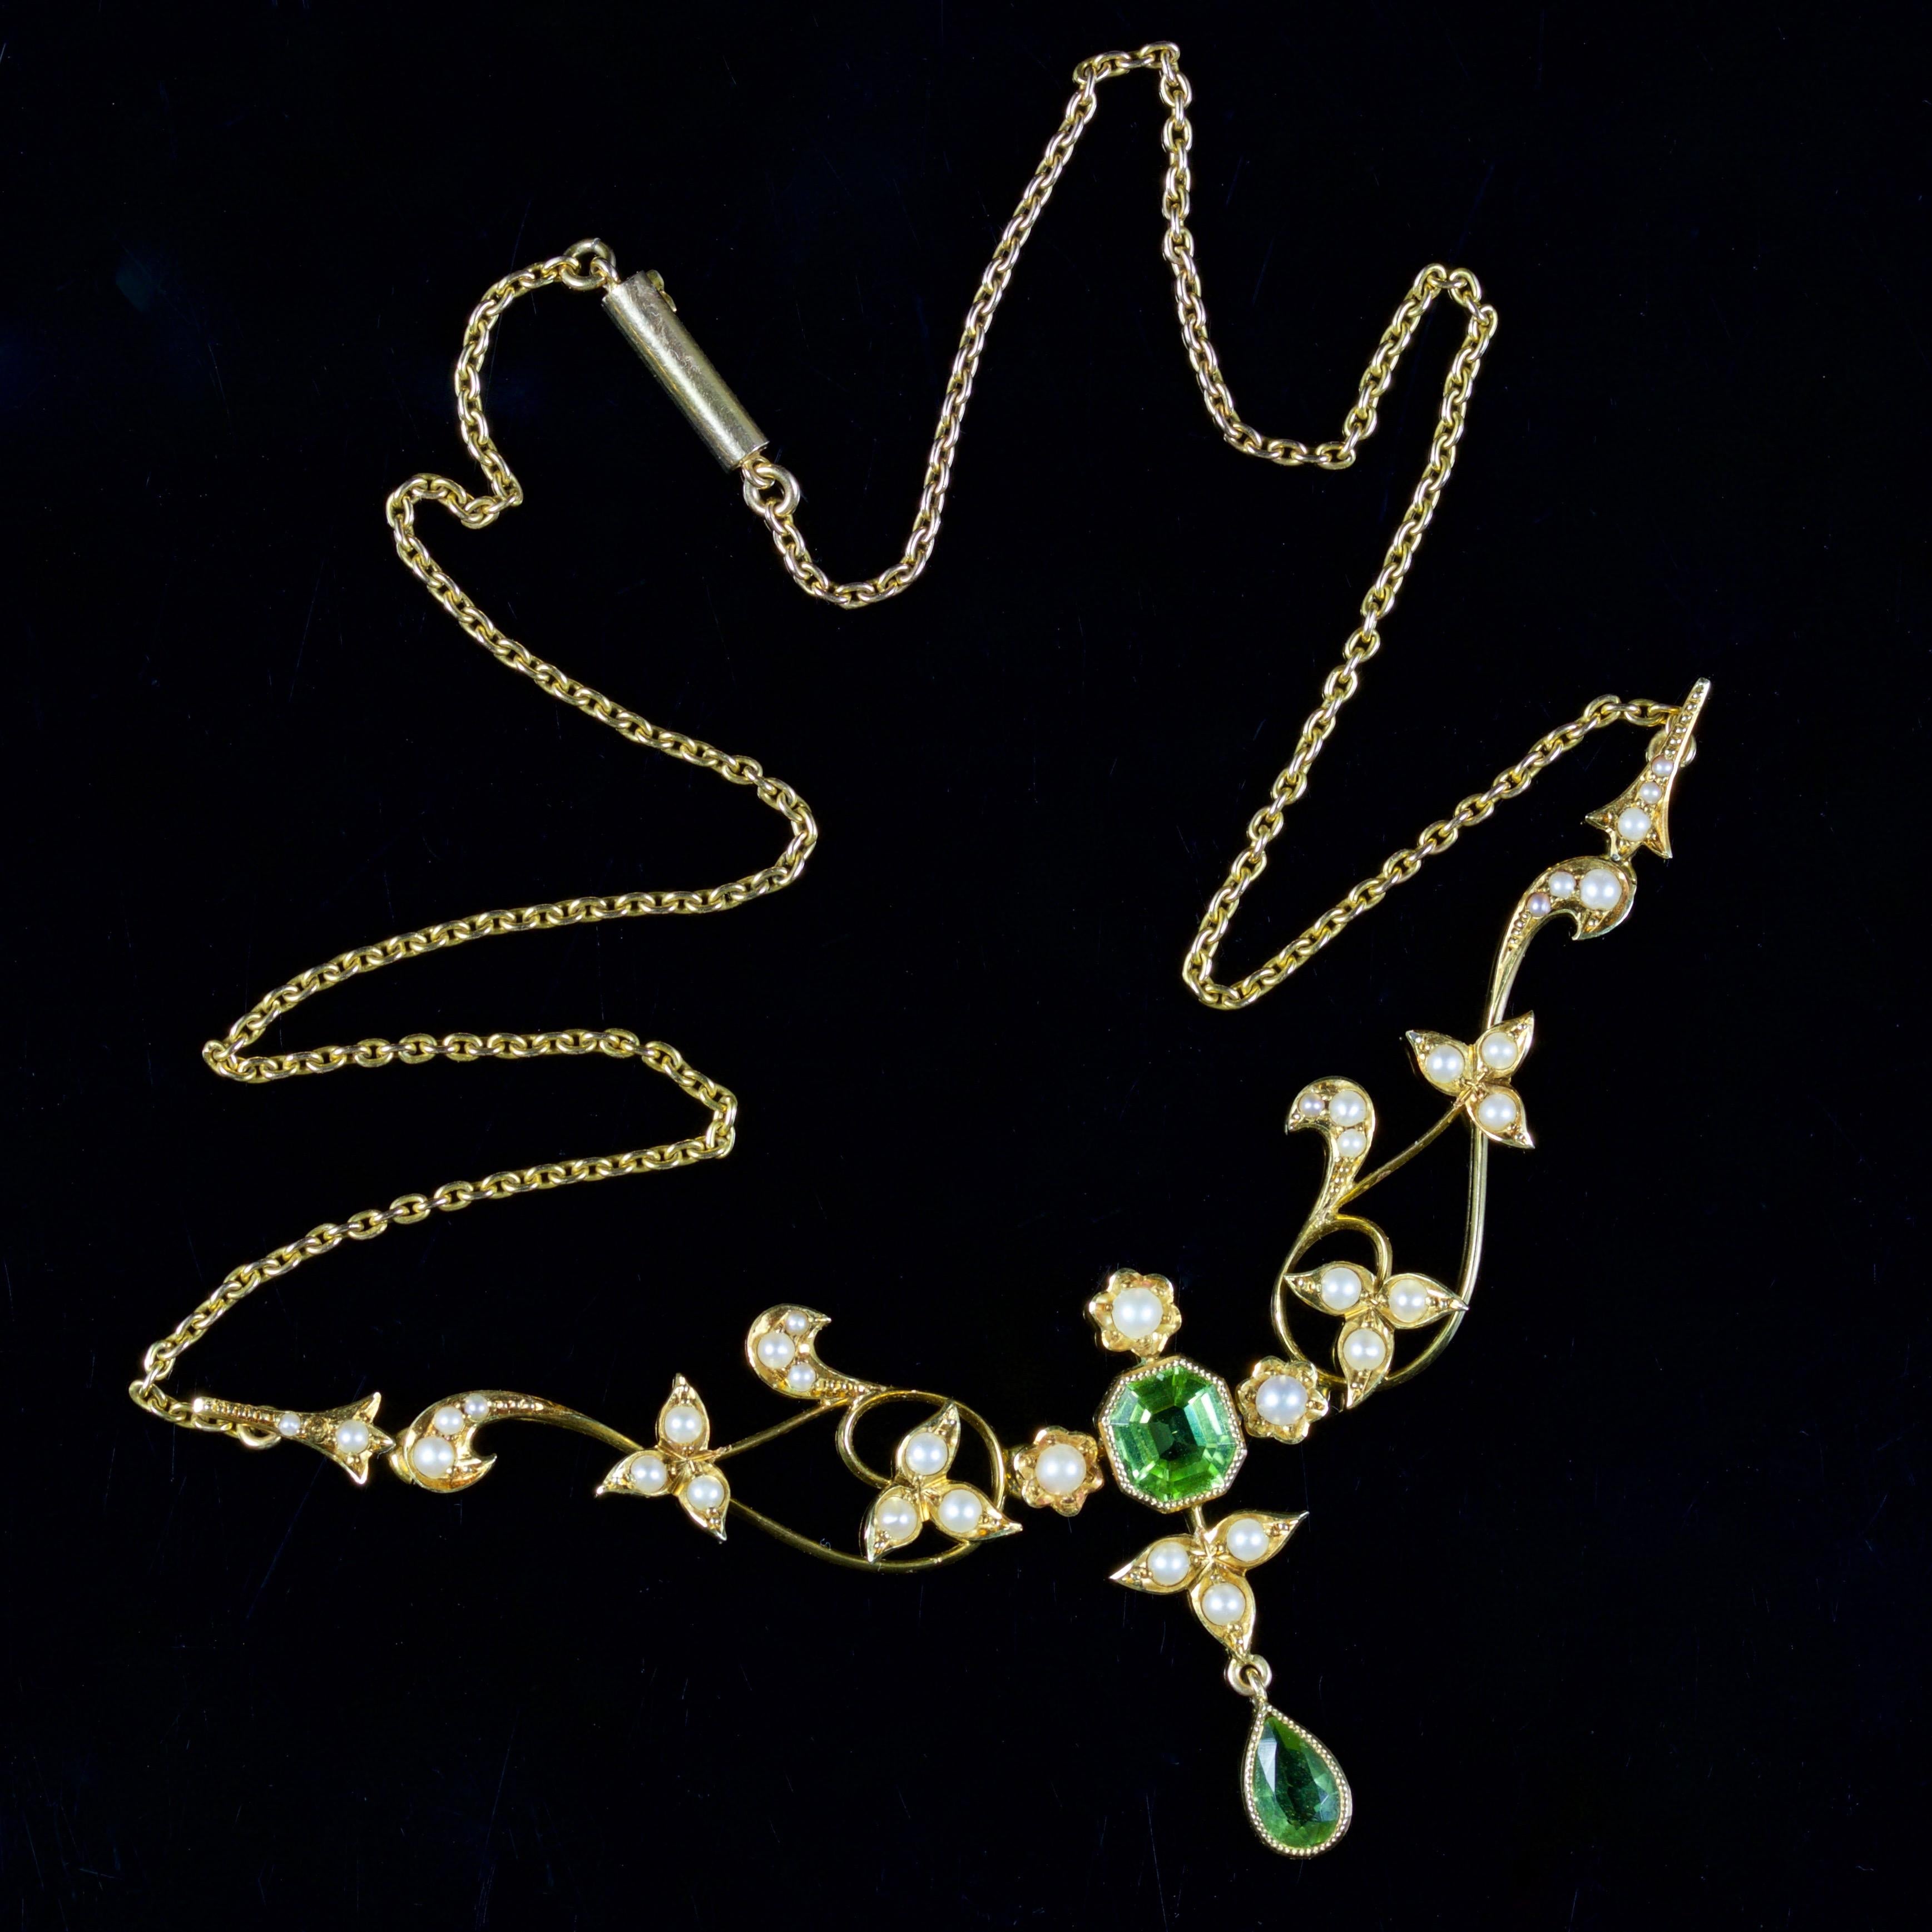 Antique Victorian Peridot Pearl Necklace 15 Carat, circa 1900 In Excellent Condition For Sale In Lancaster, Lancashire